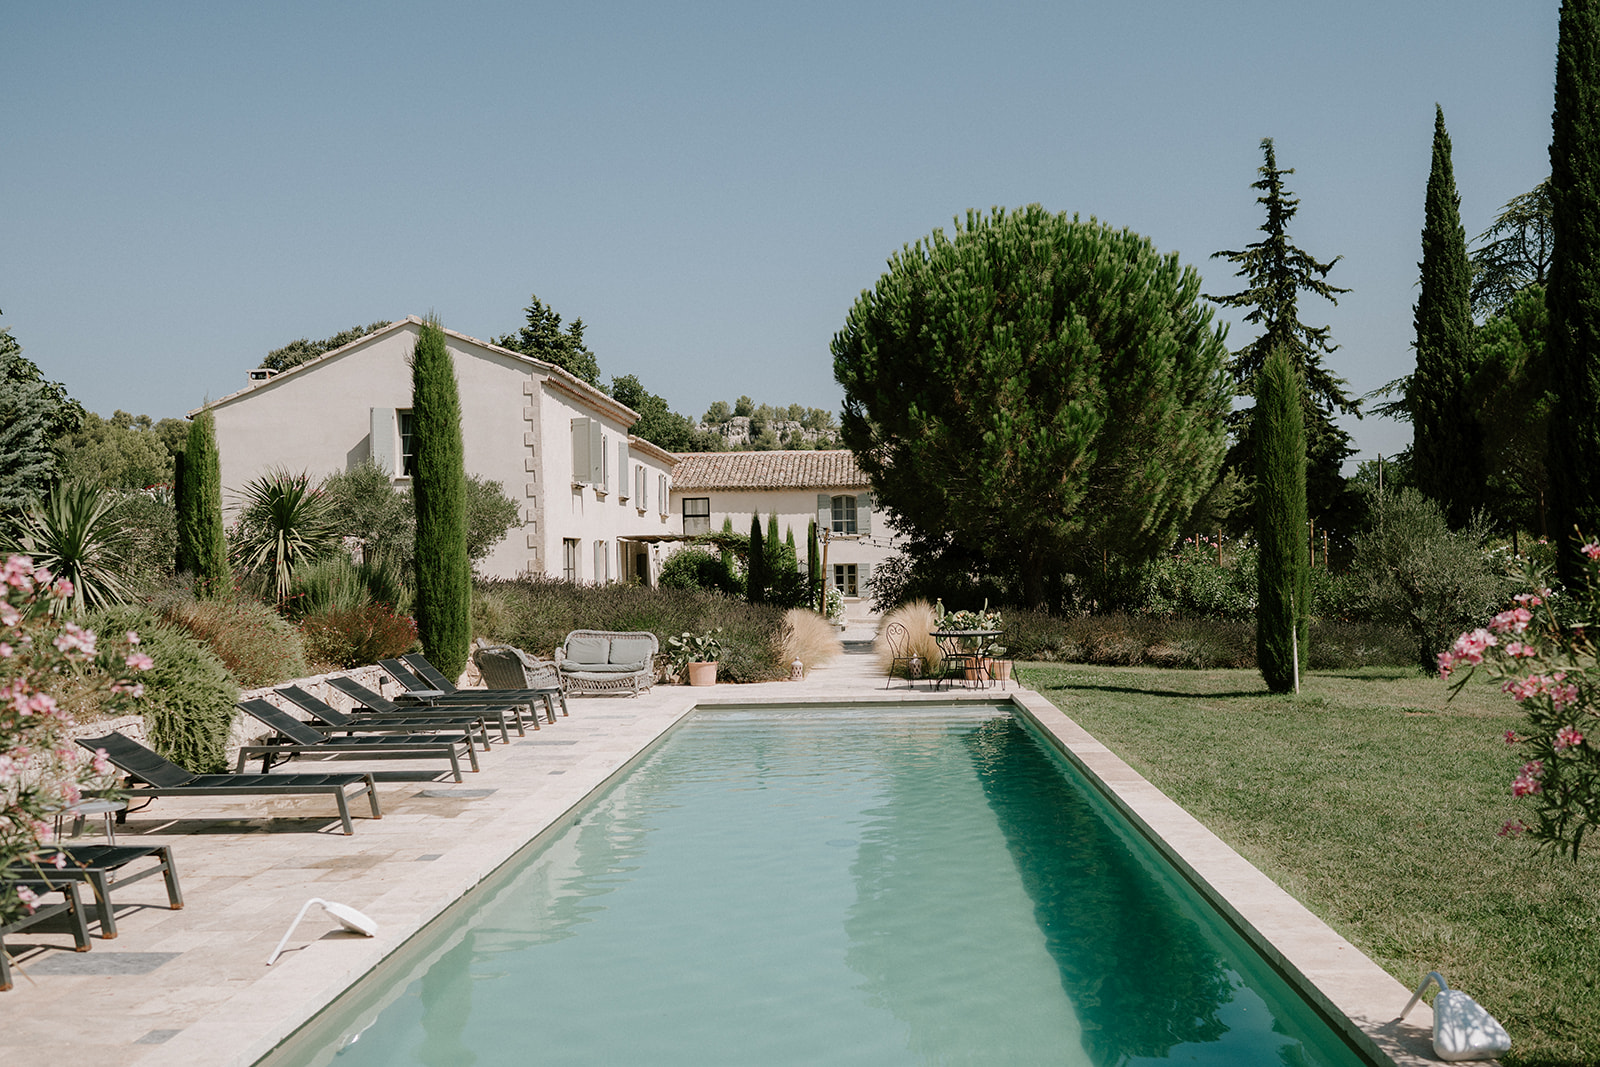 wedding venue with swimming pool Provence, France